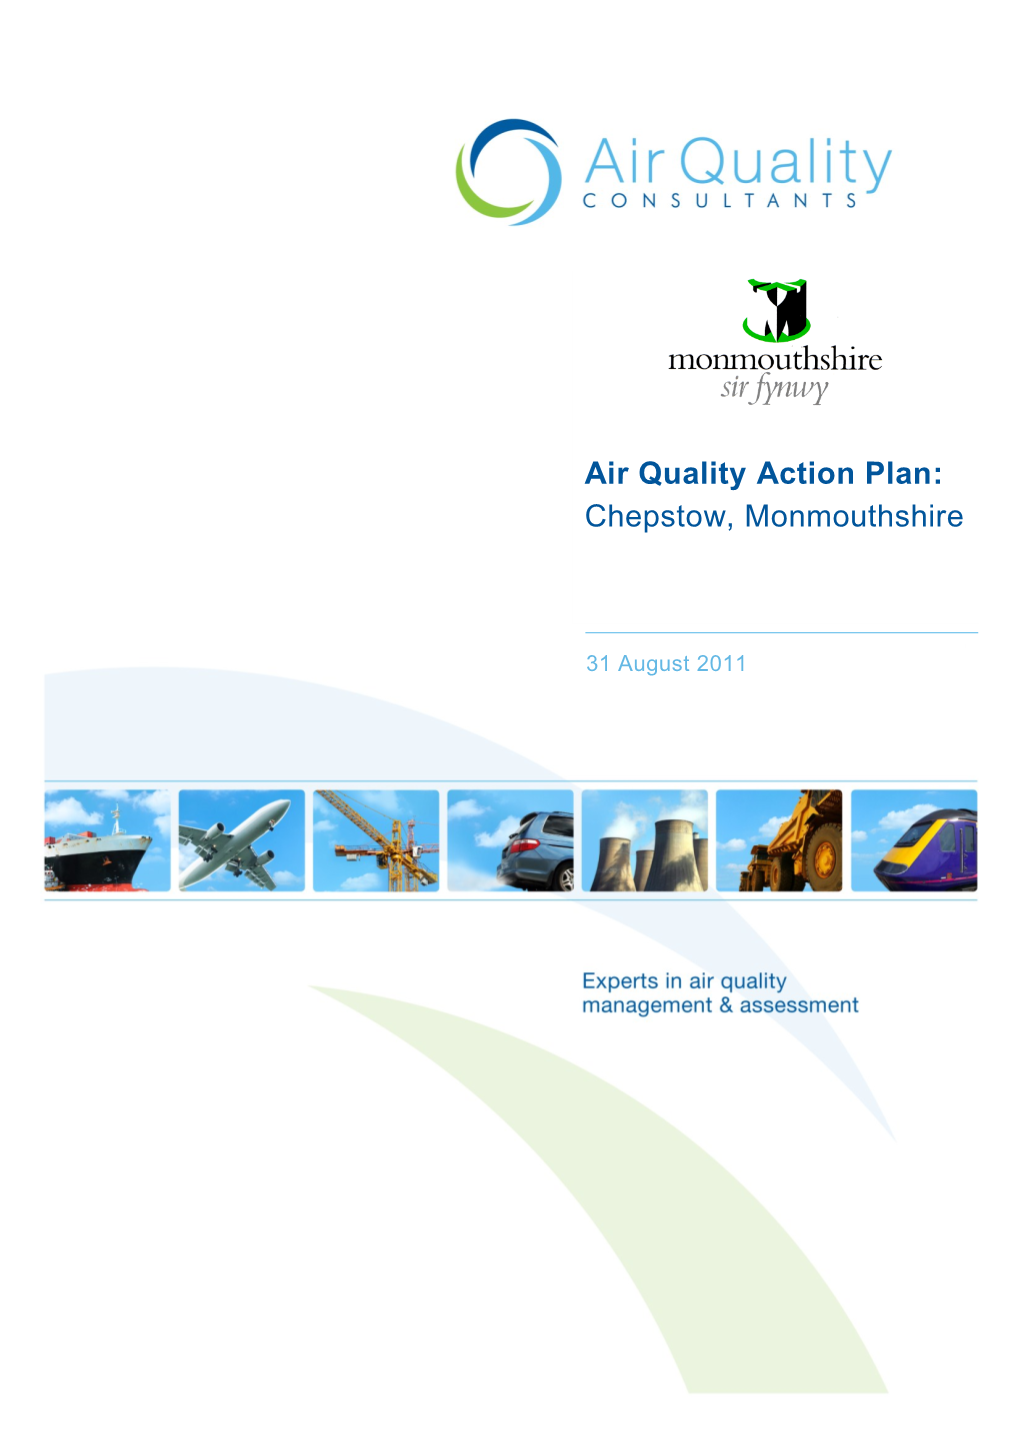 Air Quality Action Plan for Chepstow